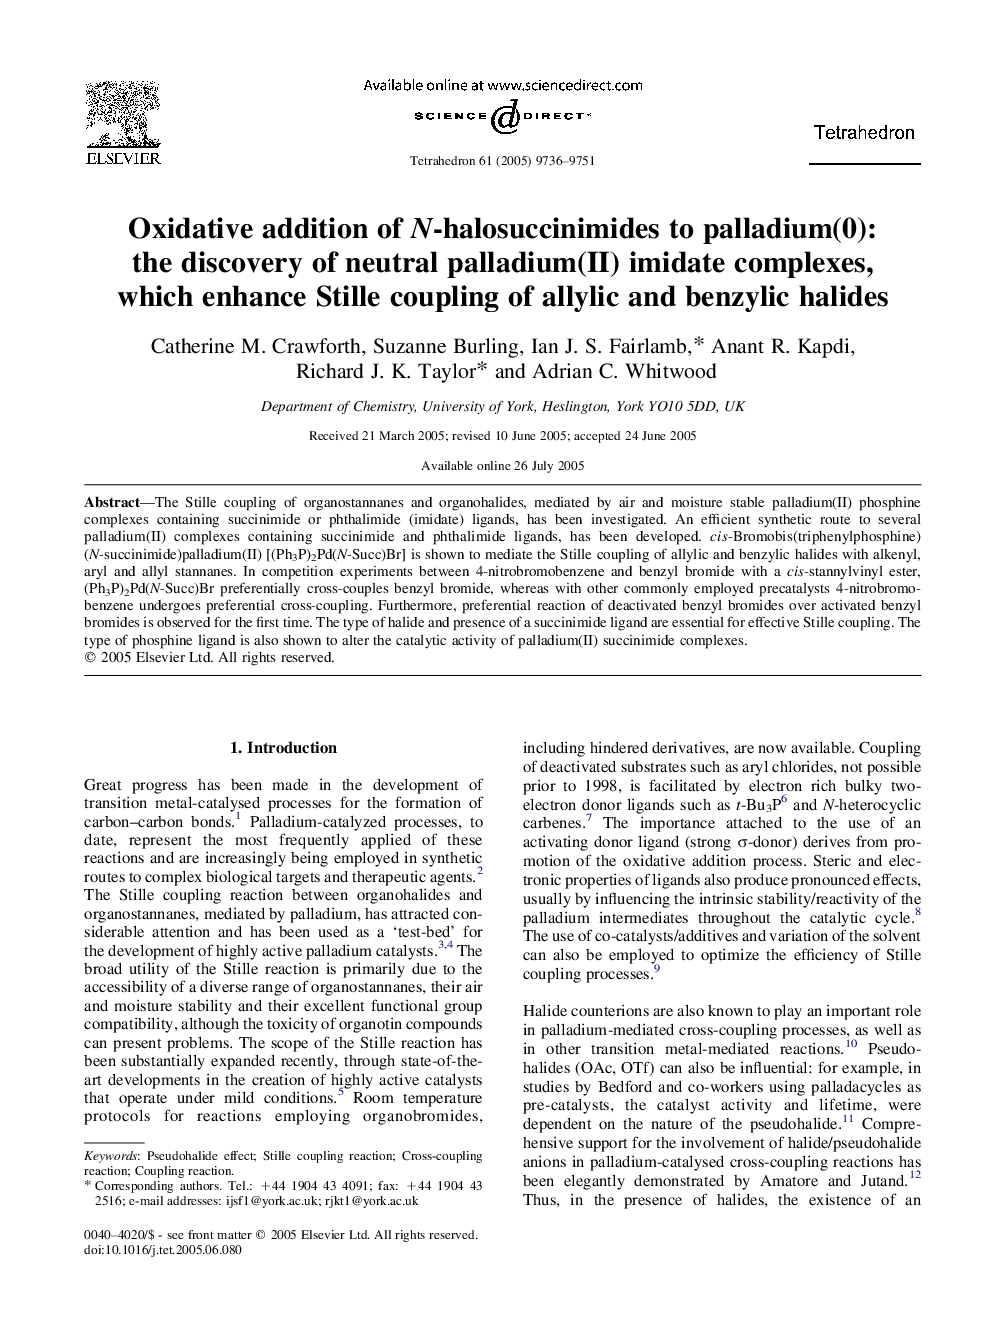 Oxidative addition of N-halosuccinimides to palladium(0): the discovery of neutral palladium(II) imidate complexes, which enhance Stille coupling of allylic and benzylic halides